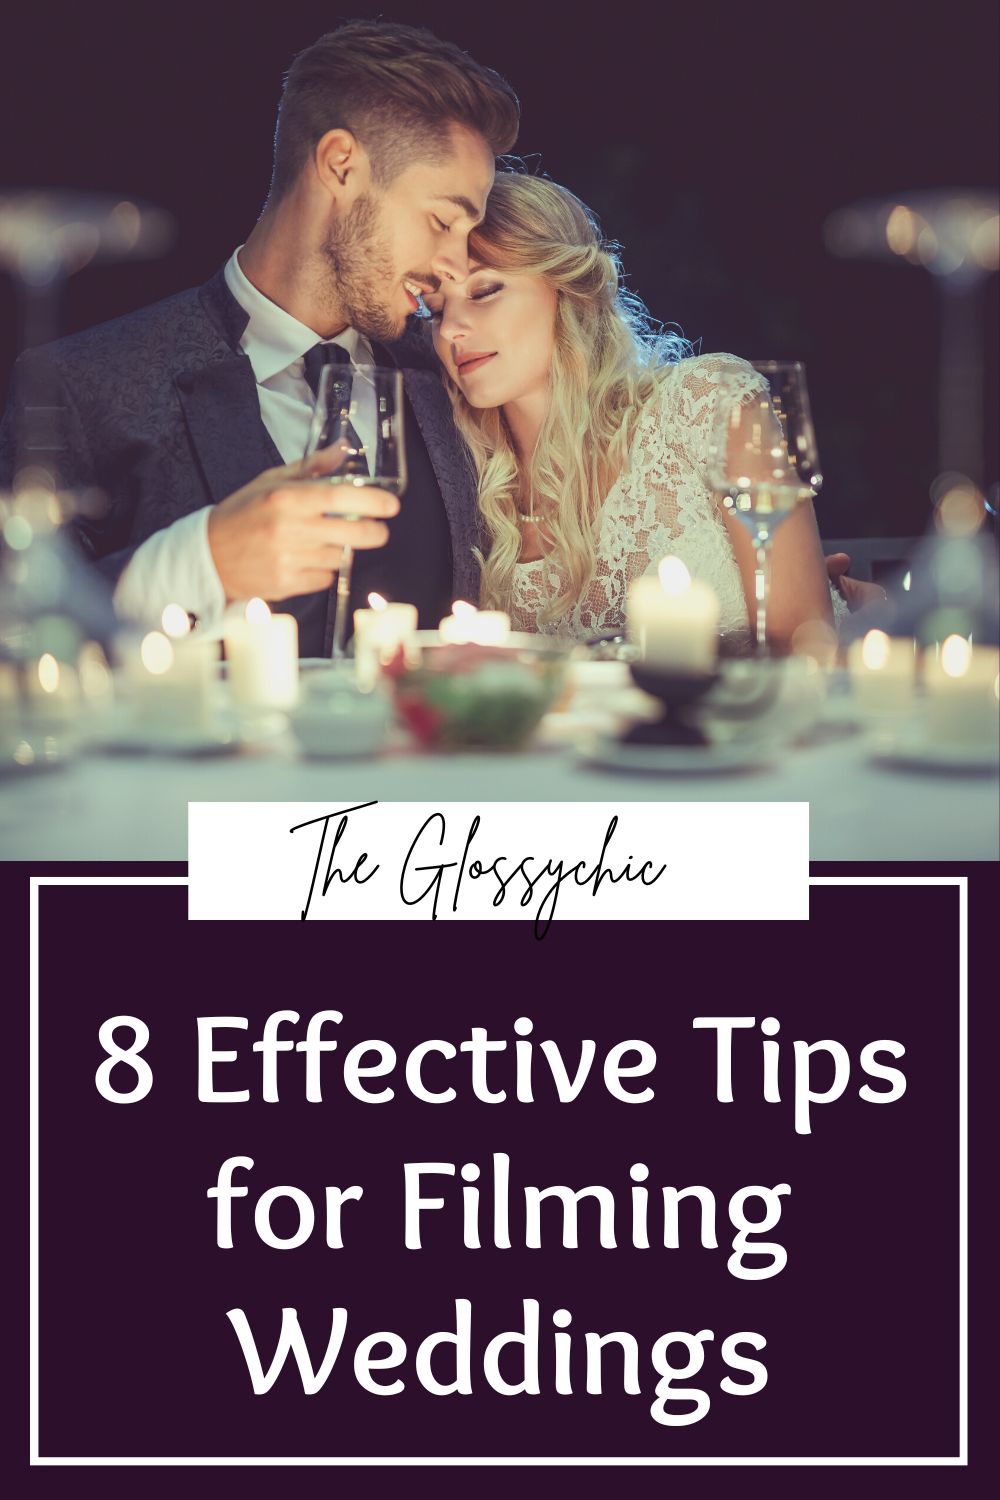 Ways To Film The best Wedding Video As A Solo Videographer